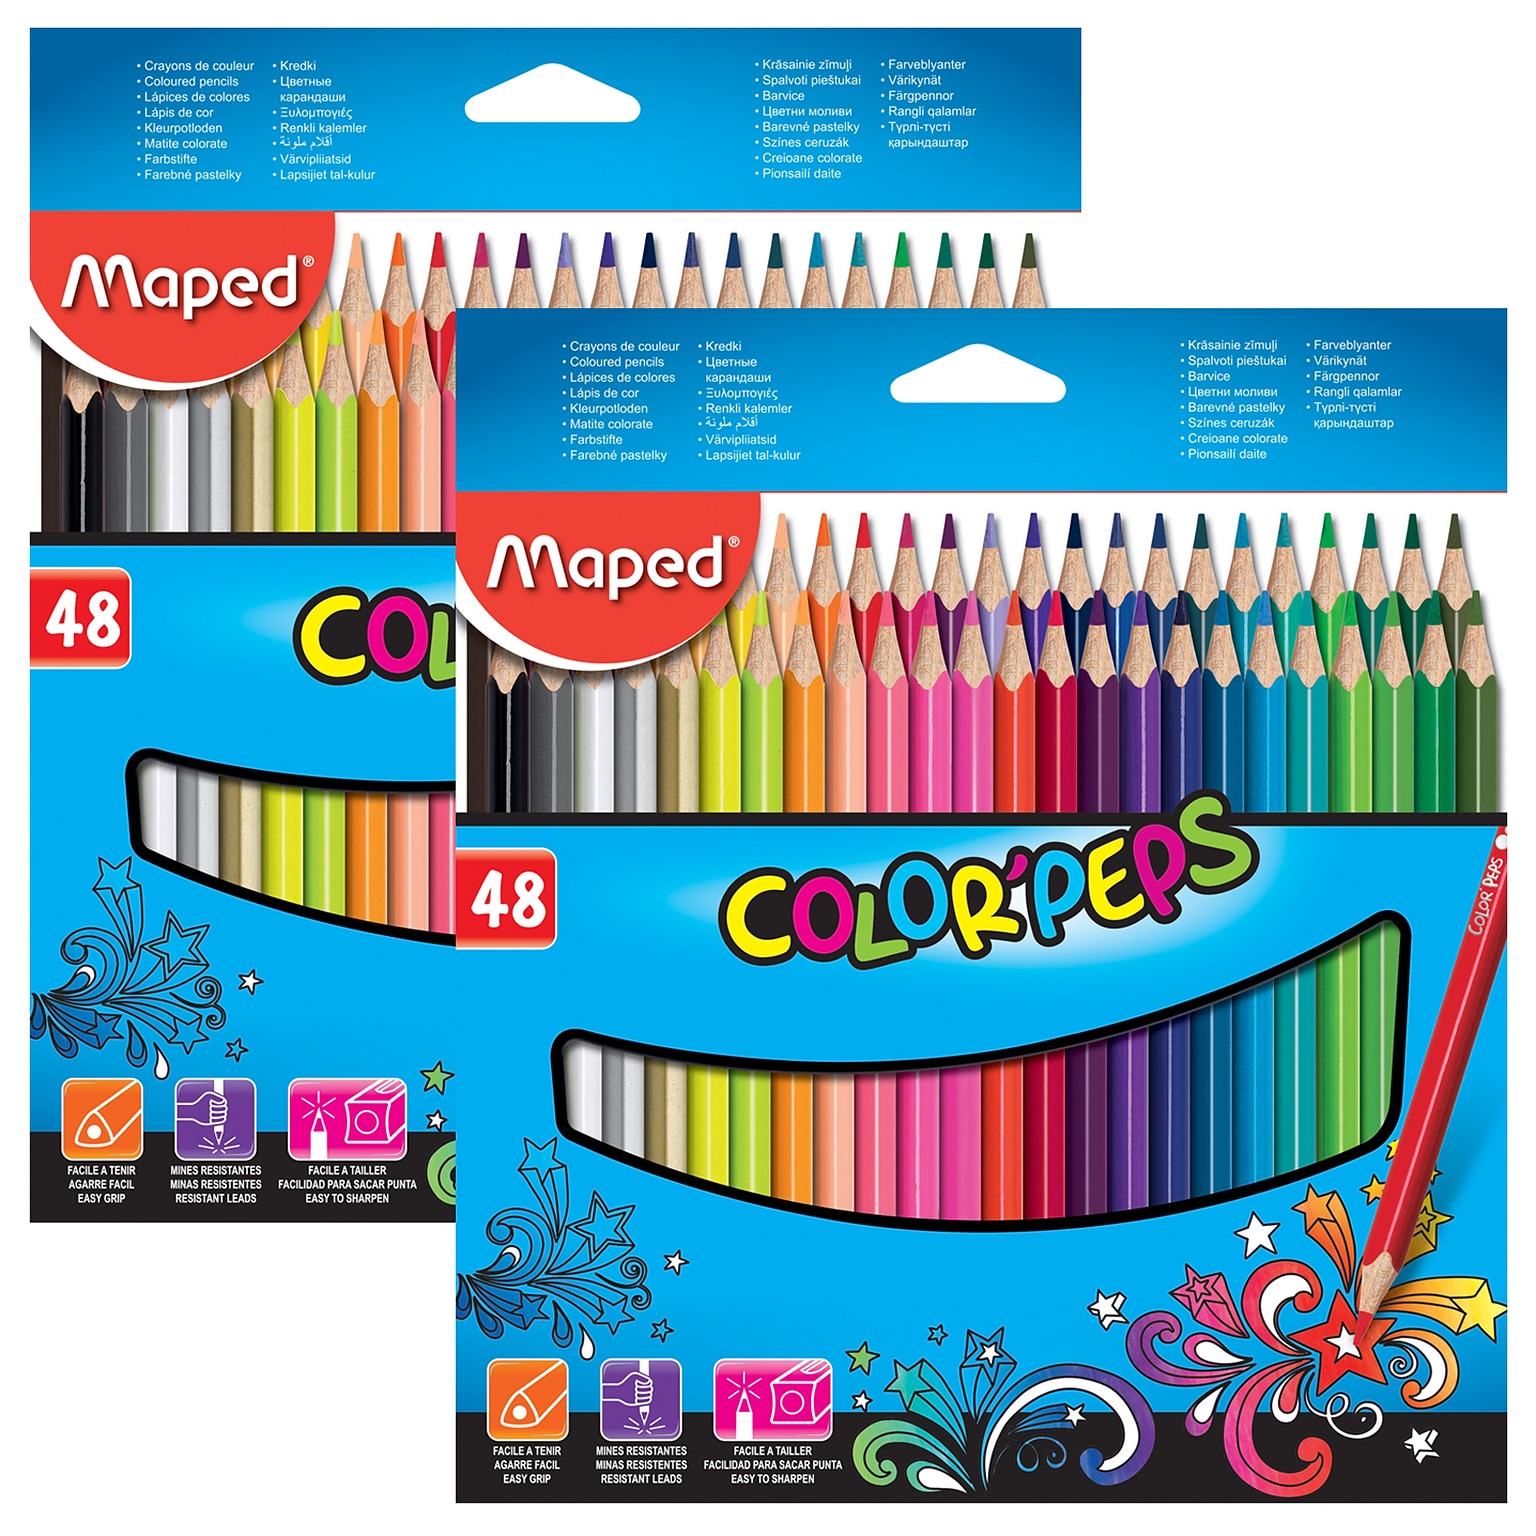 Maped ColorPeps Triangular Colored Pencils, Assorted Colors, 48/Bundle, 2 Bundles (MAP832048ZV-2)